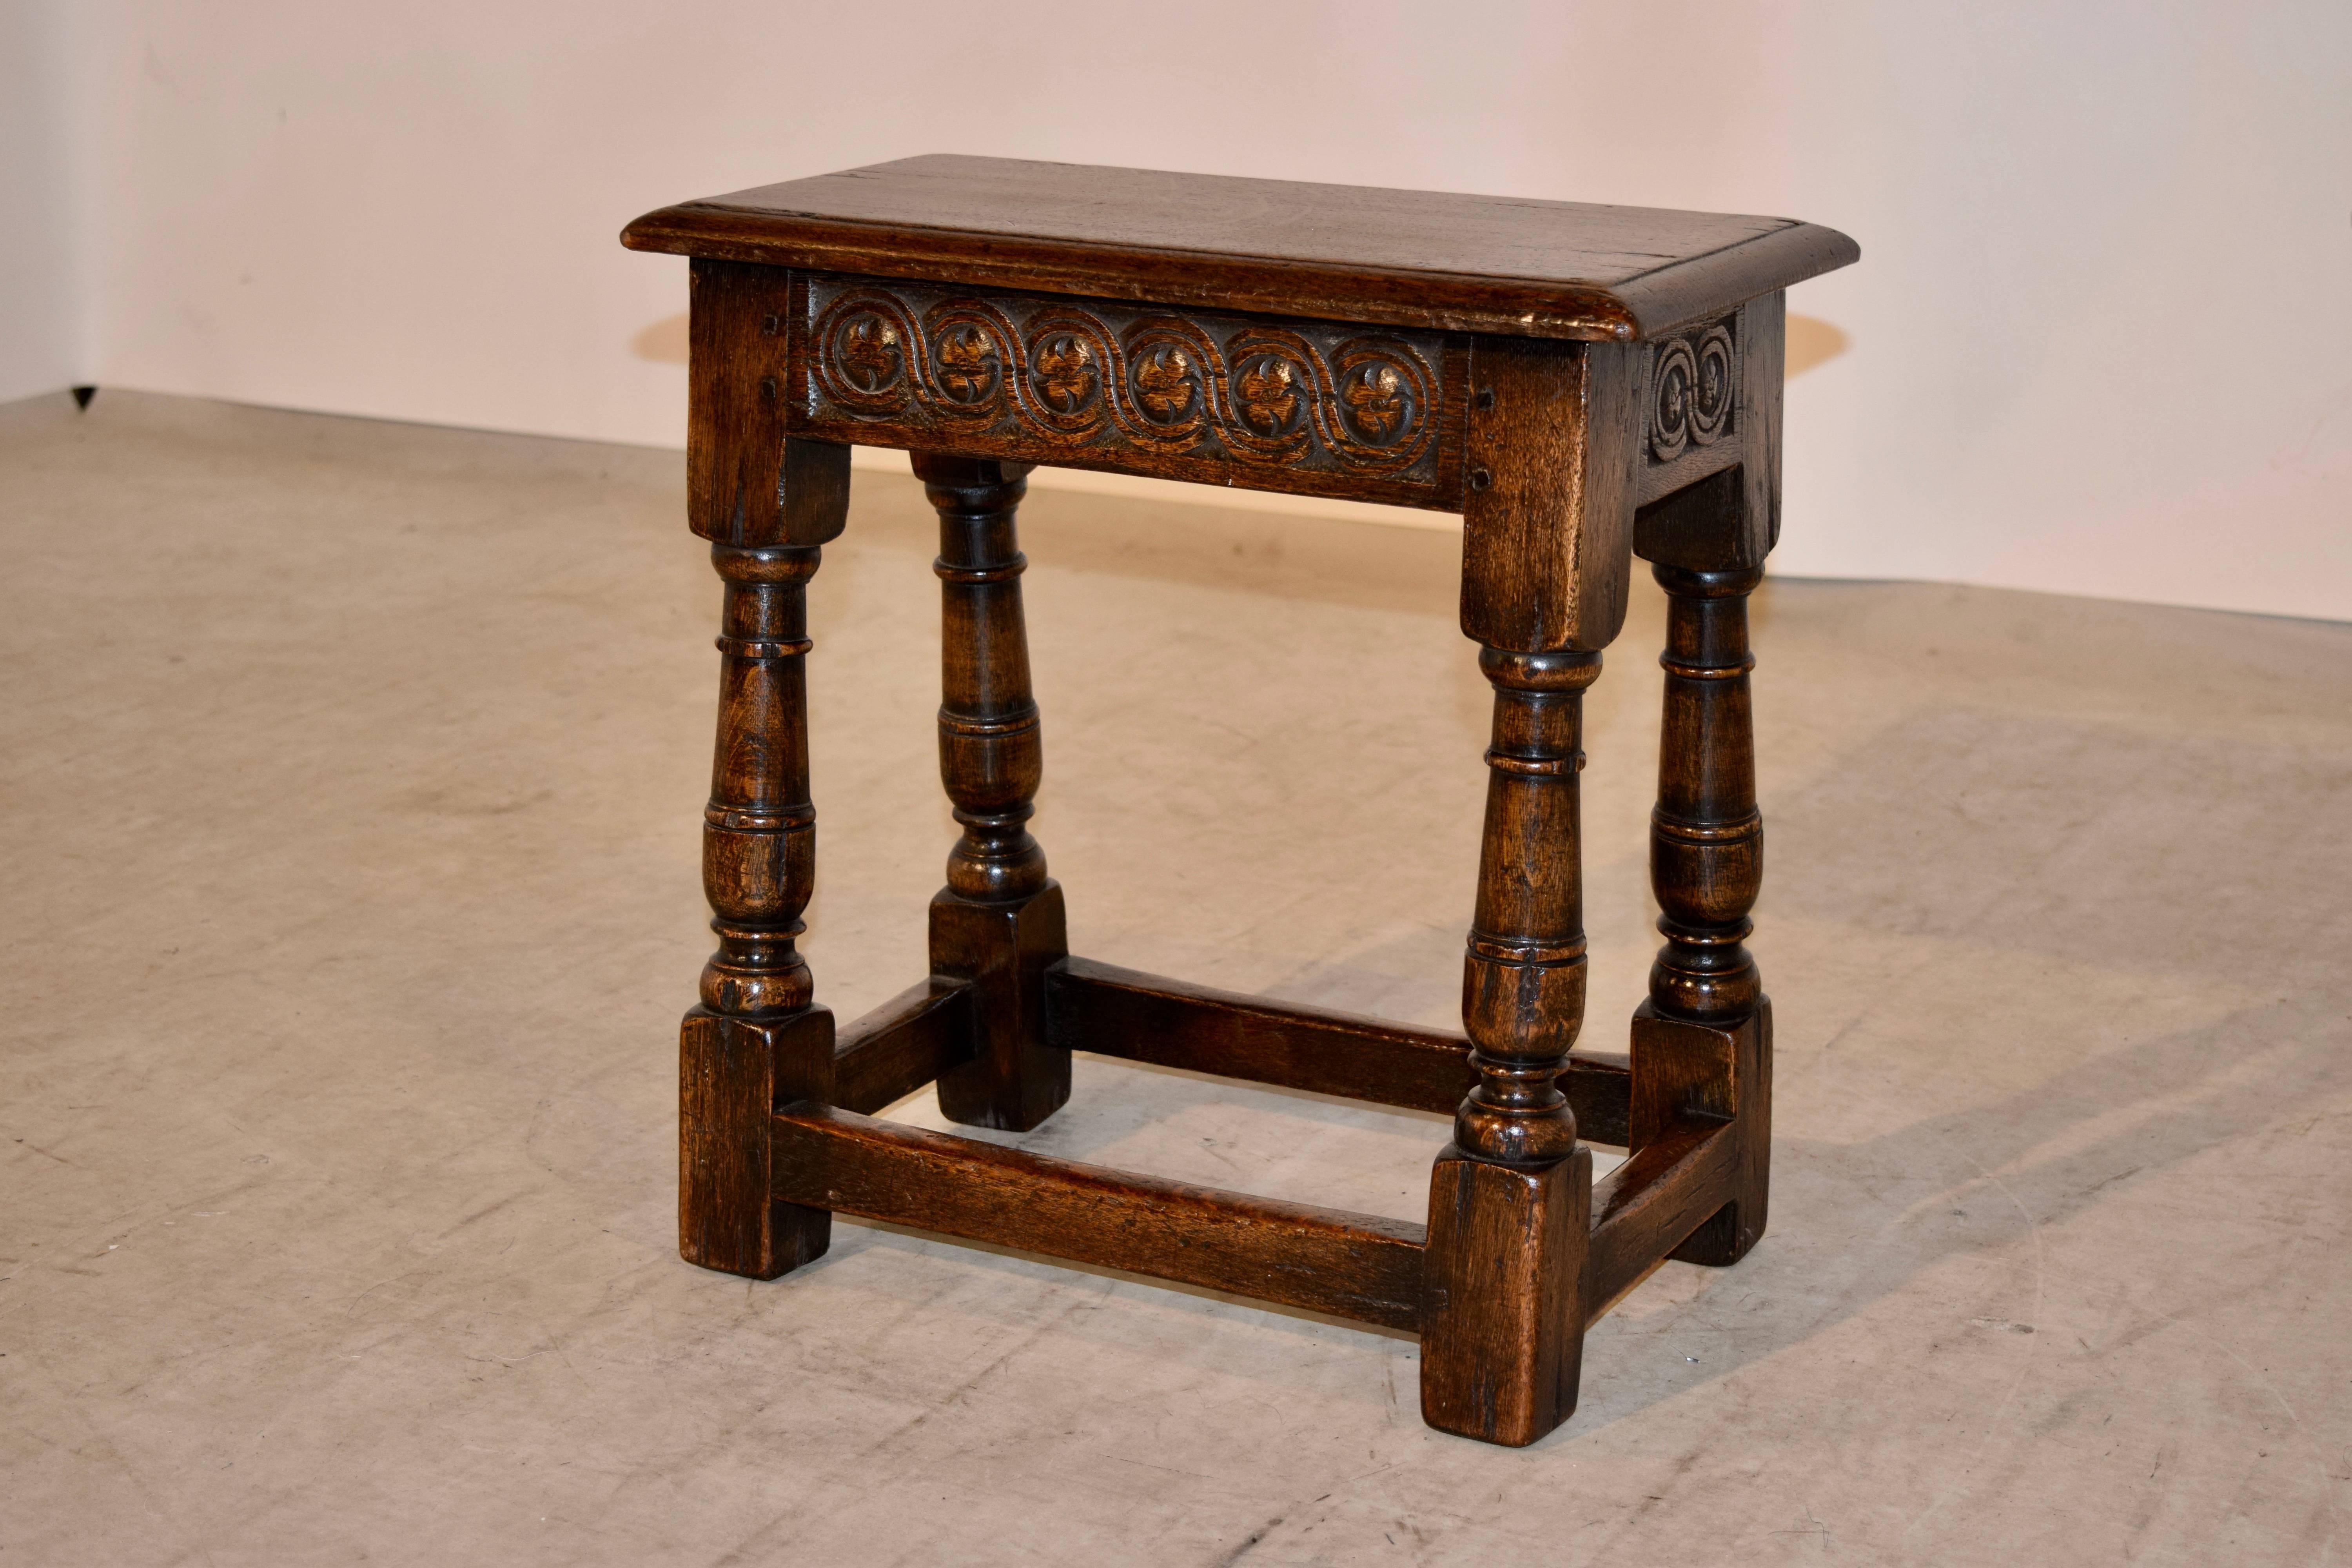 19th century English oak joynt stool with a beveled edge around the top, following down to a hand-carved decorated apron on all four sides and hand turned legs, which have slight losses to the turned collars. The legs are joined by simple